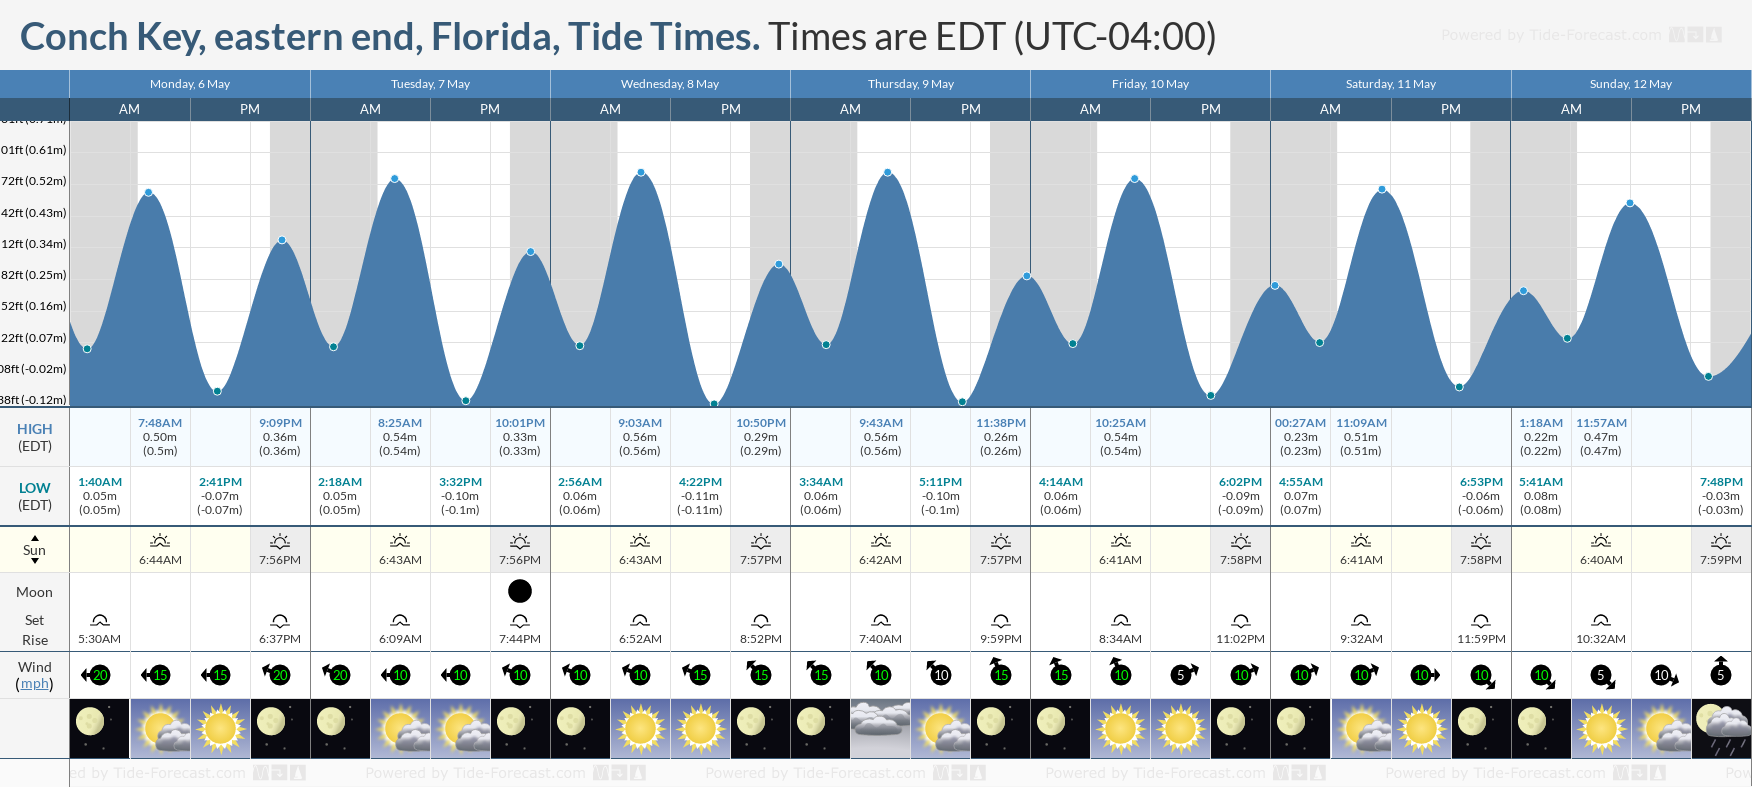 Conch Key, eastern end, Florida Tide Chart including high and low tide tide times for the next 7 days